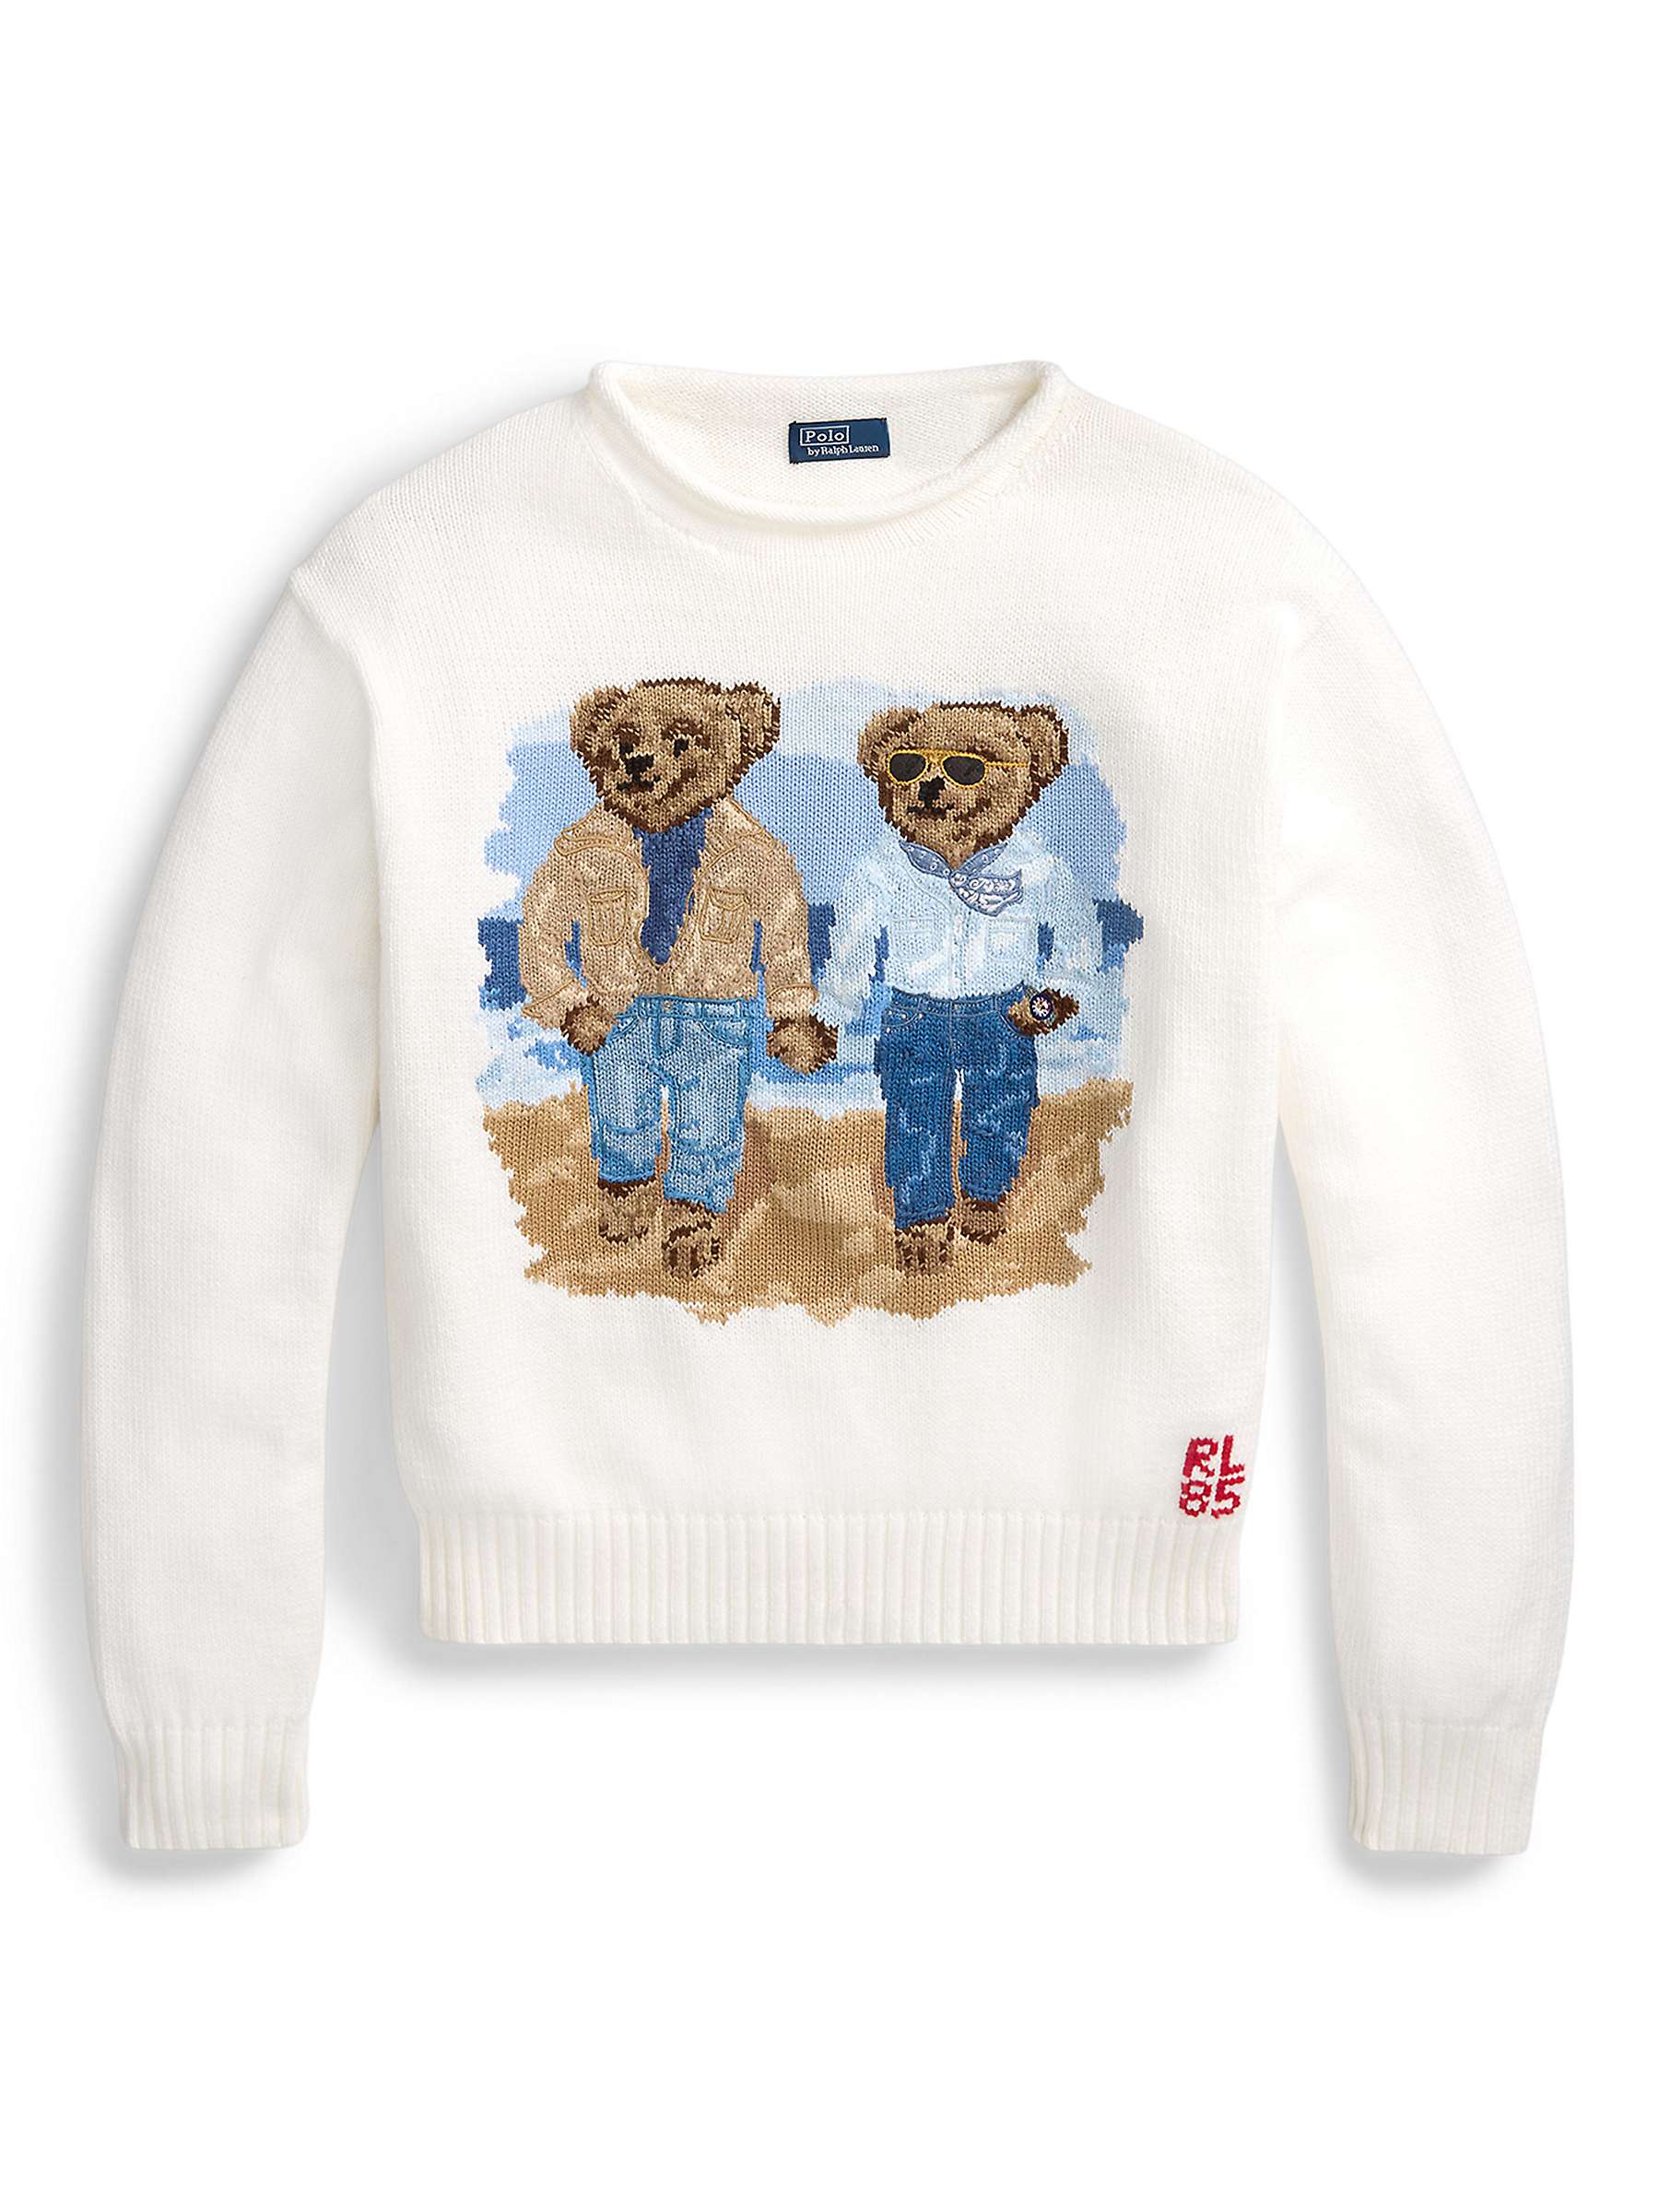 Buy Polo Ralph Lauren Embroidered Duo Bear Cotton Jumper, White Online at johnlewis.com